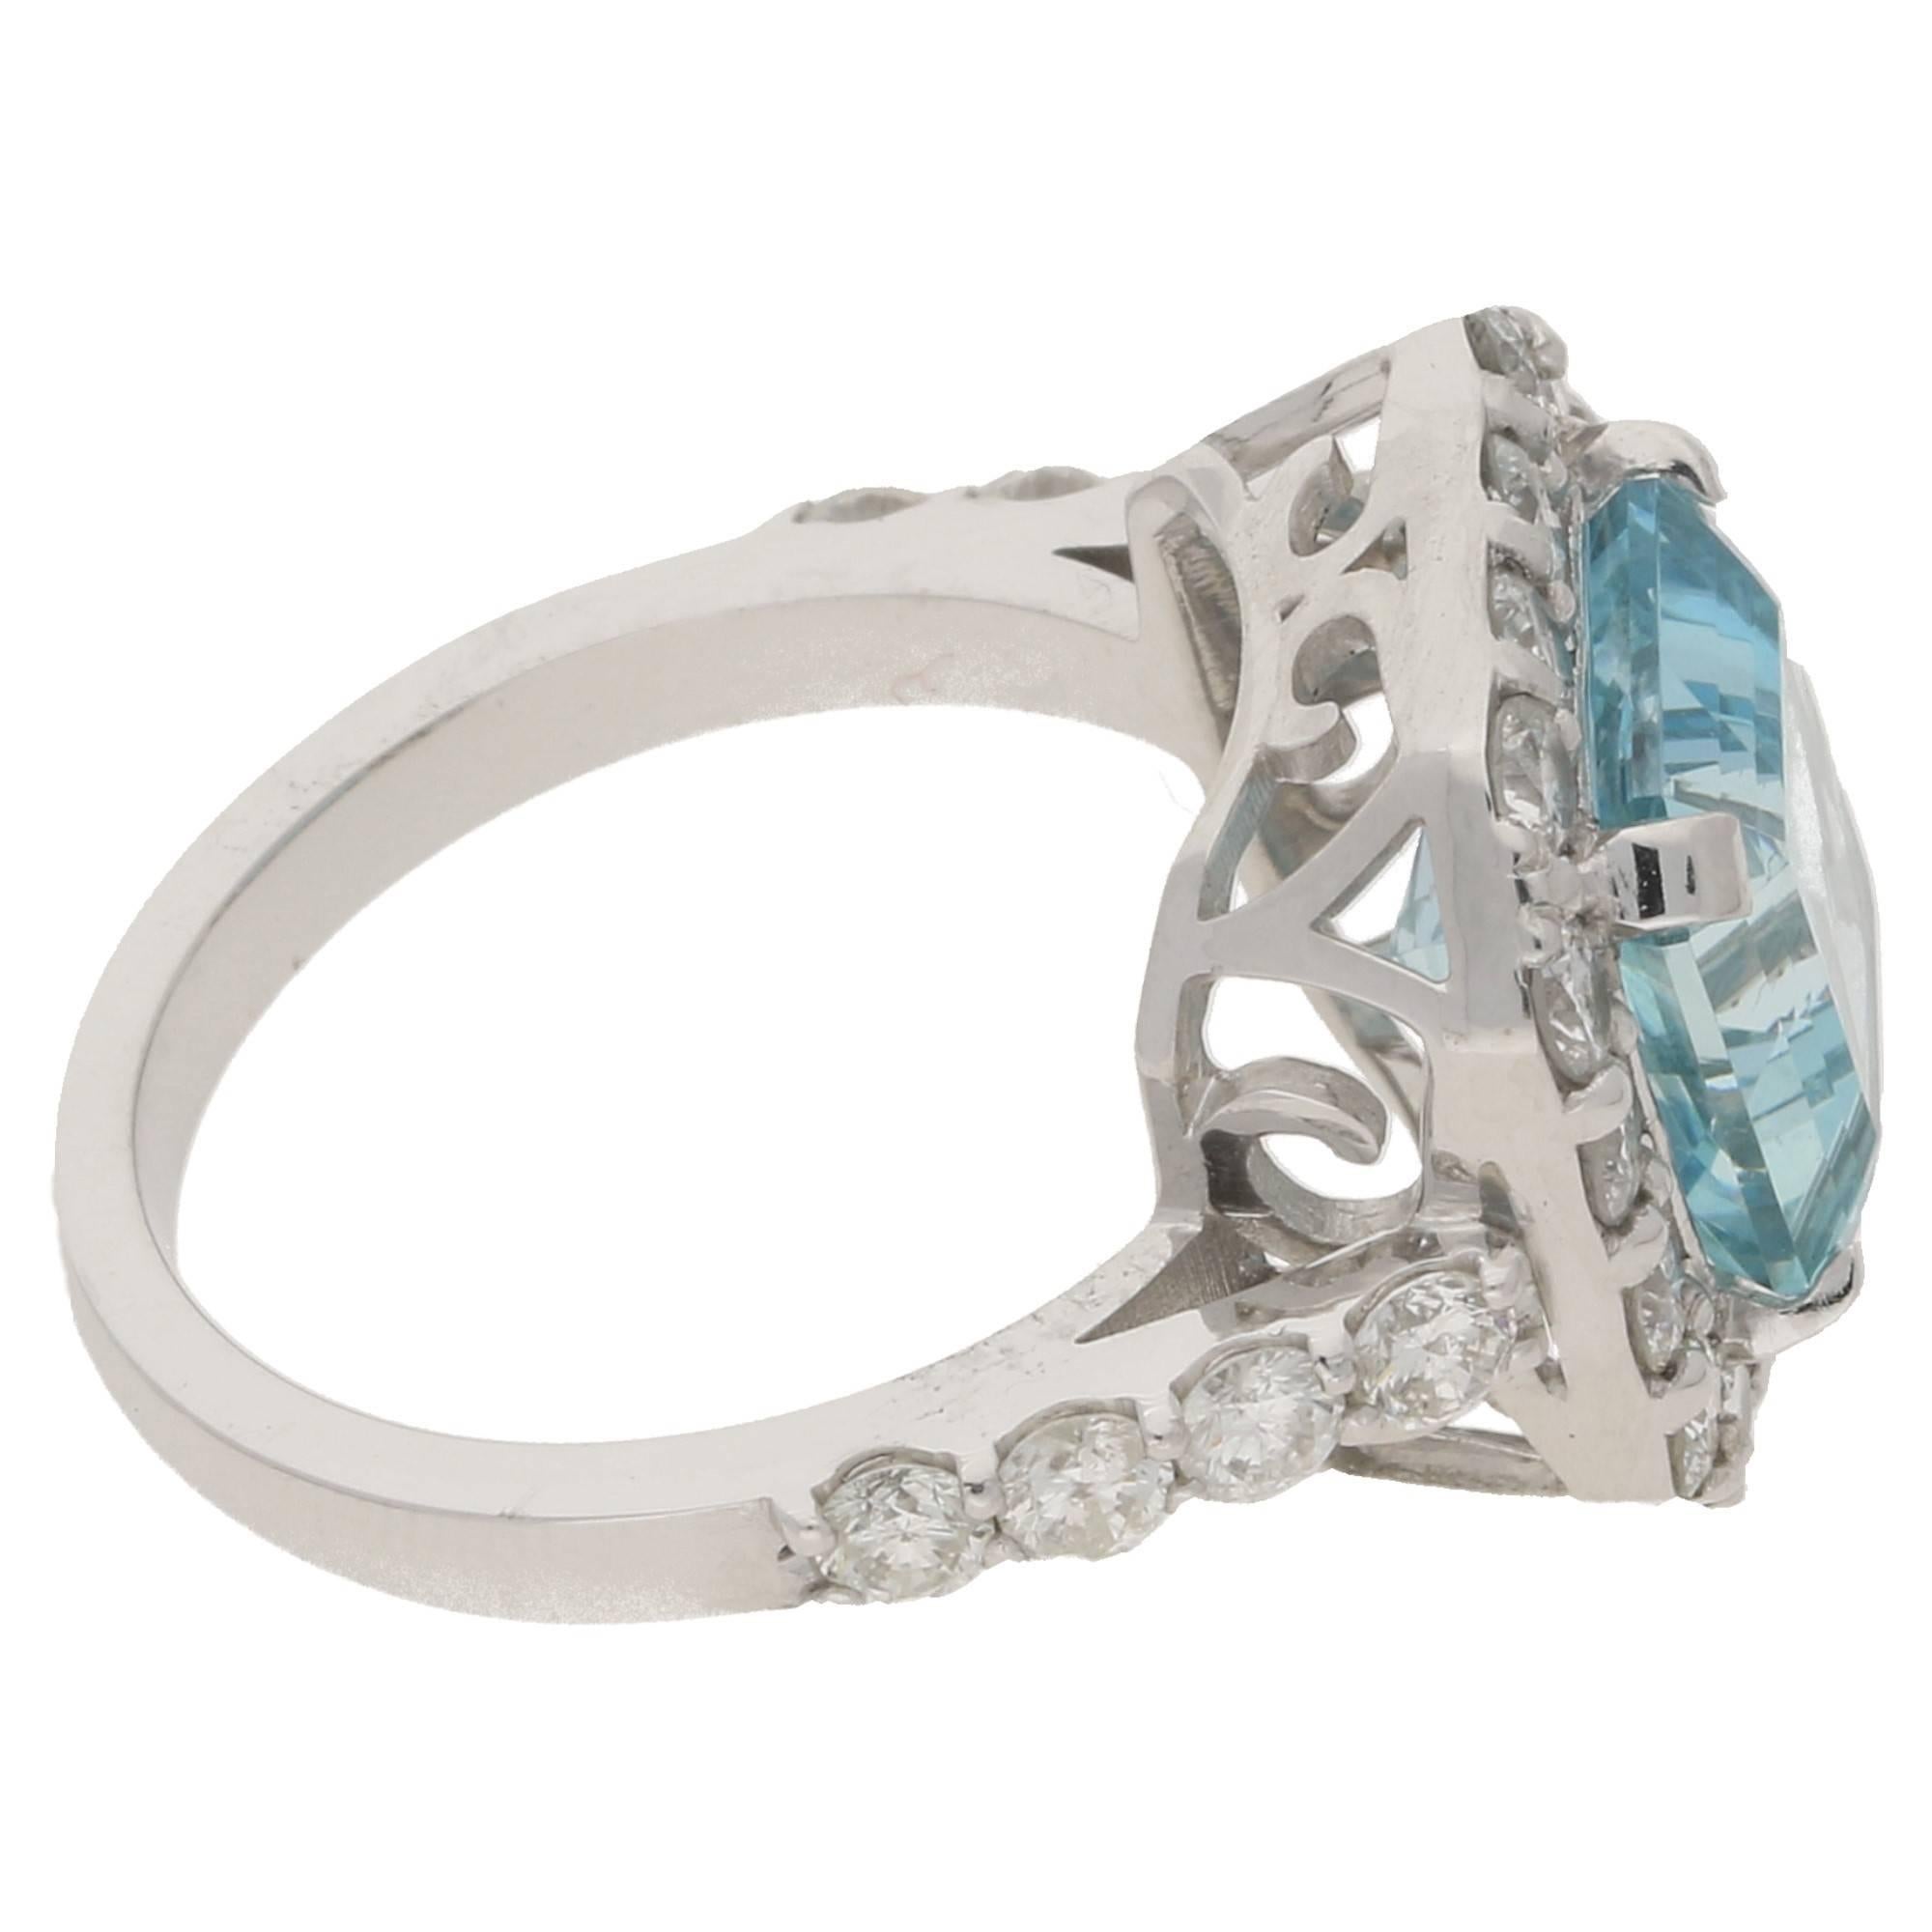 A striking modern aquamarine and diamond cluster ring in 18ct white gold. The ring is formed of a square emerald cut aquamarine elegantly set with four corner claws, surrounded with sixteen round brilliant cut diamonds. Each drop down shoulder is